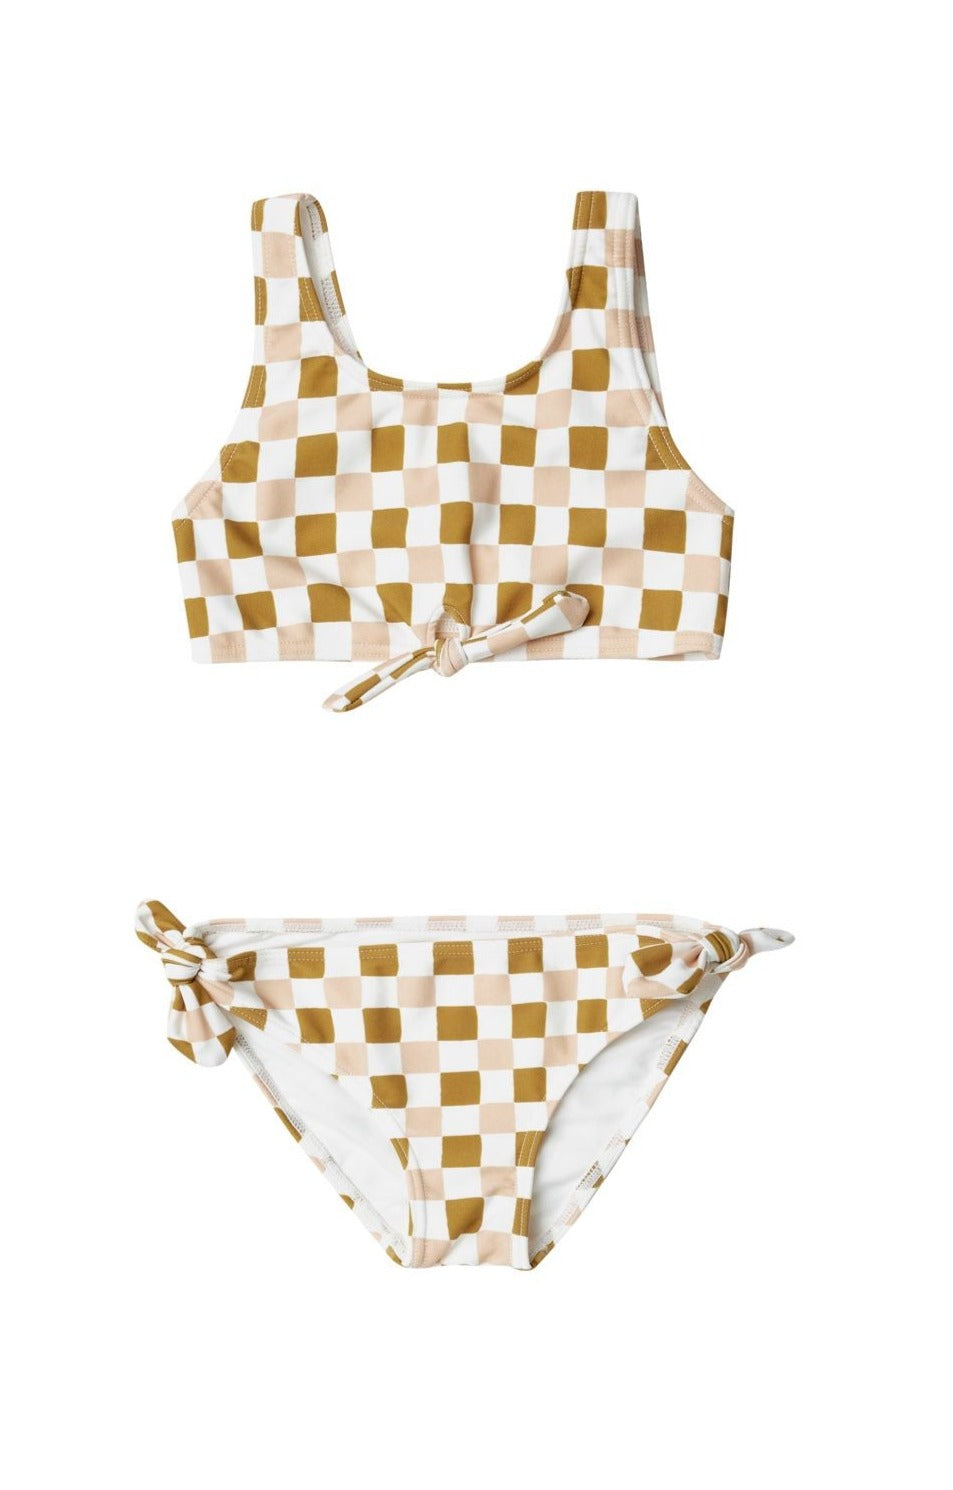 Target Is Taking 30% Off Swimsuits for the Start of Summer — Shop Now